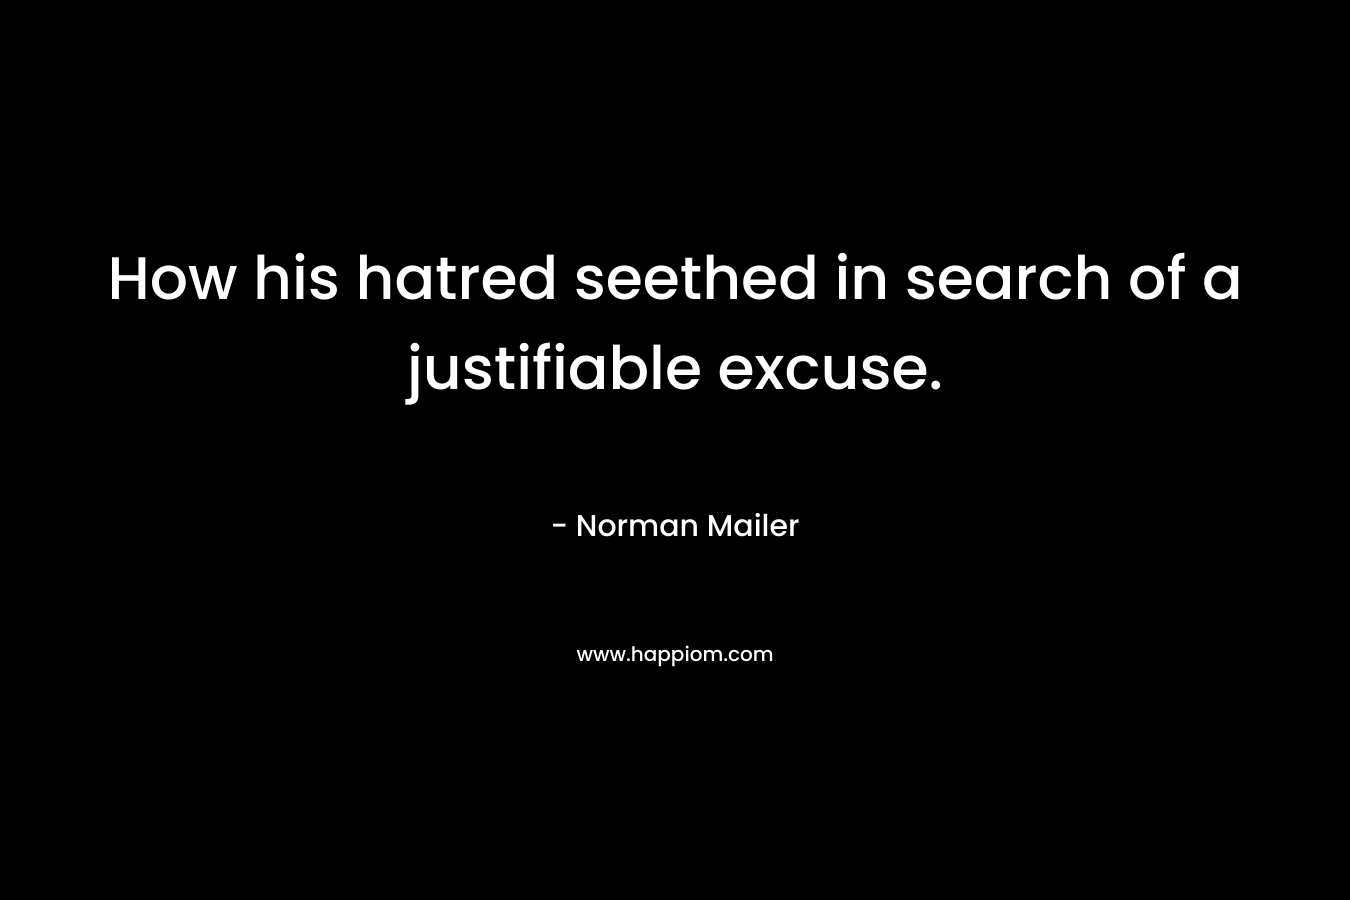 How his hatred seethed in search of a justifiable excuse. – Norman Mailer